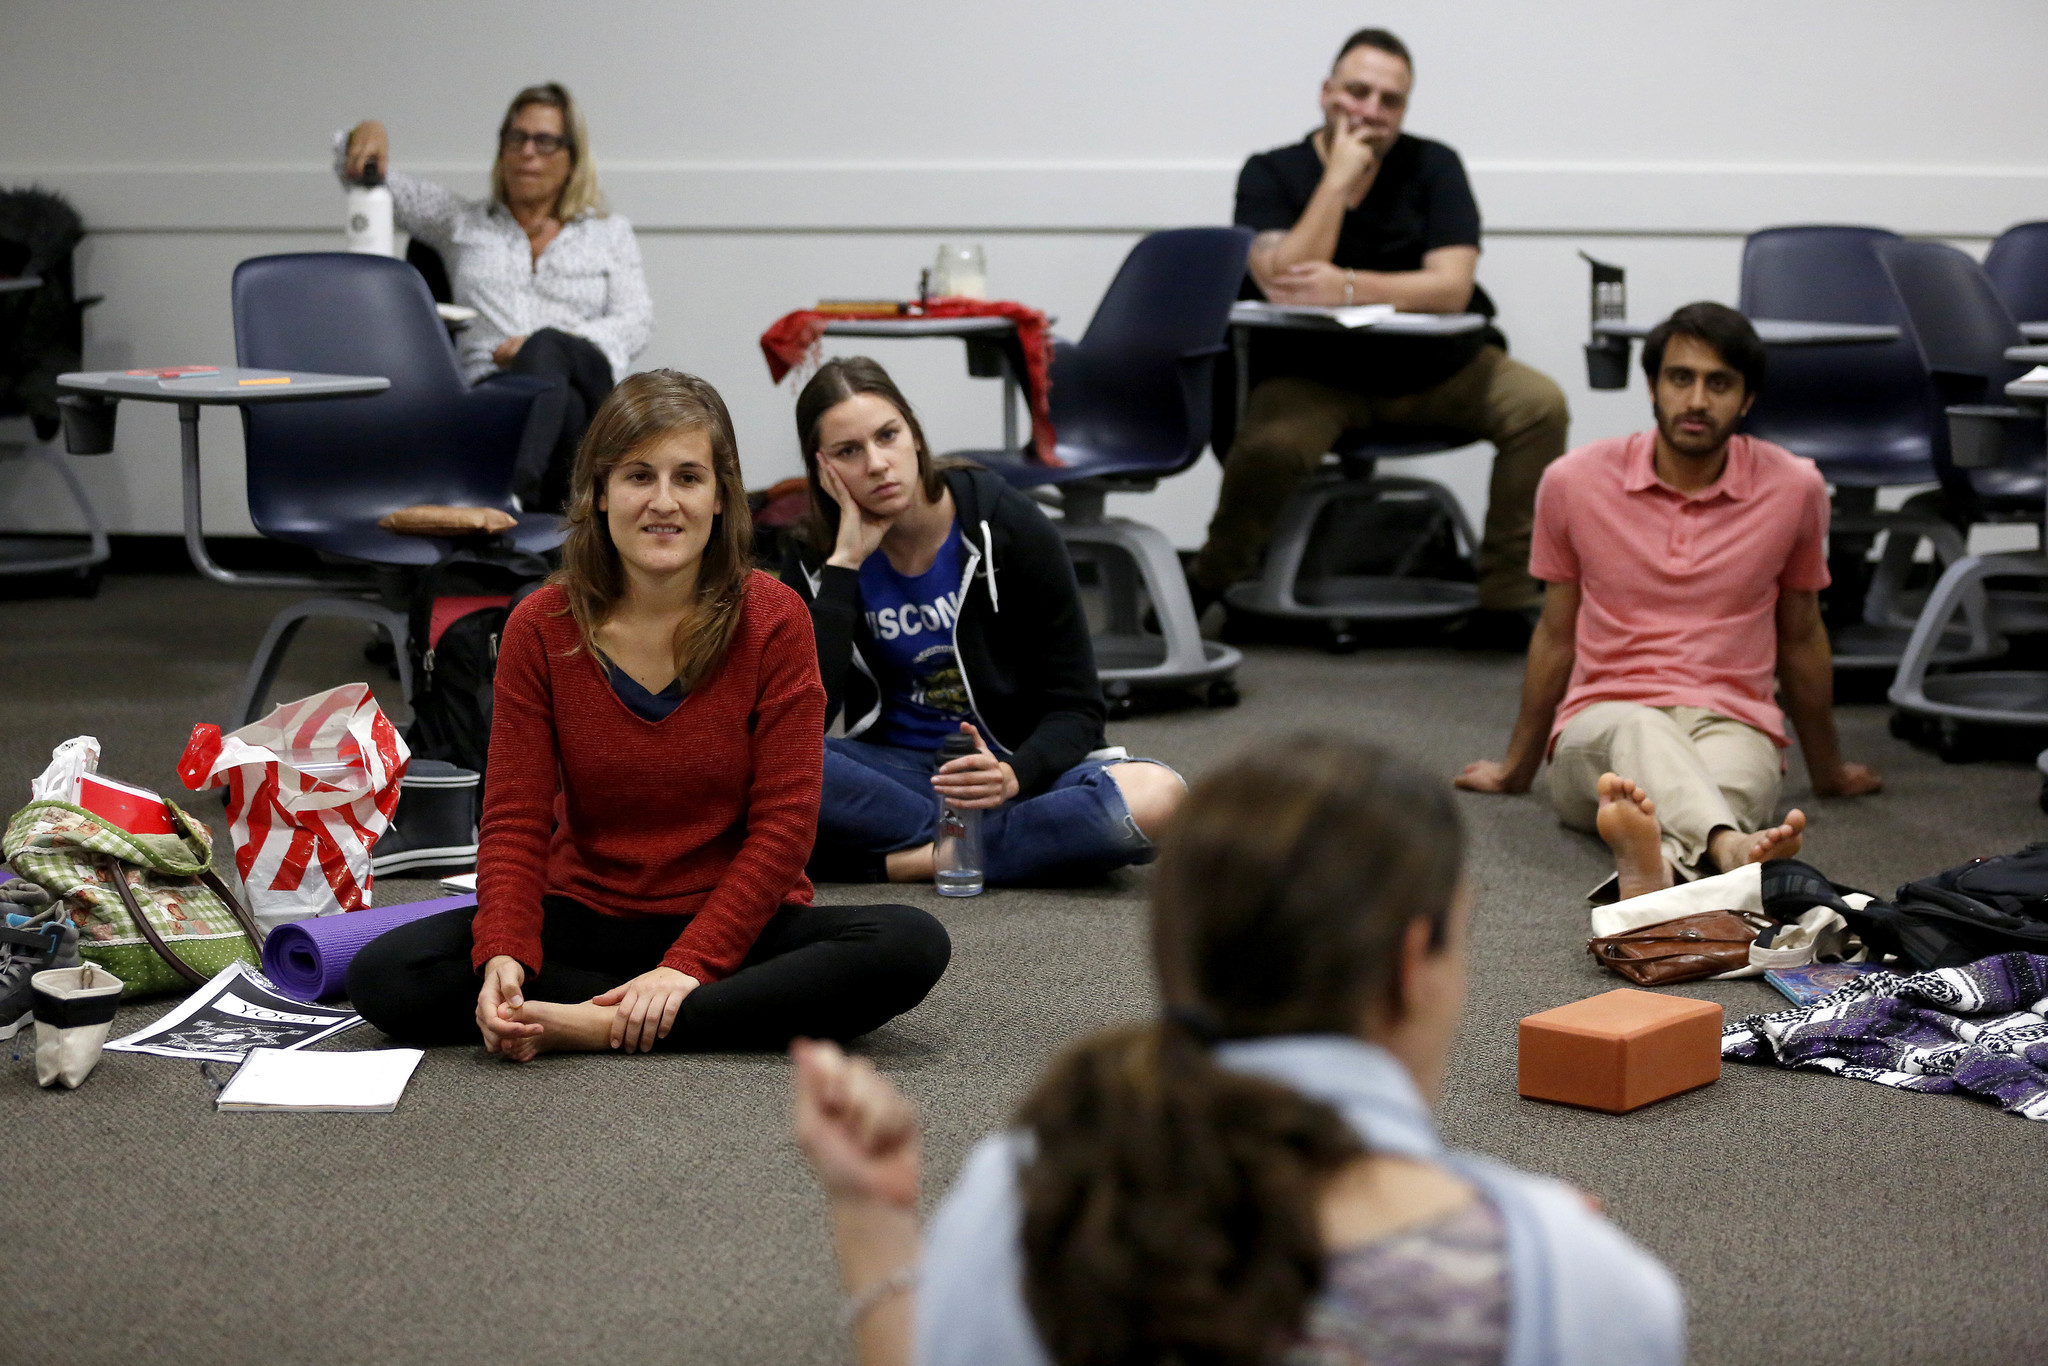 First-year master's degree in yoga students attend a class taught by professor Ana Funes at Loyola Marymount University, in Los Angeles. LMU is the only place in the U.S. you can get a master’s degree in yoga studies.